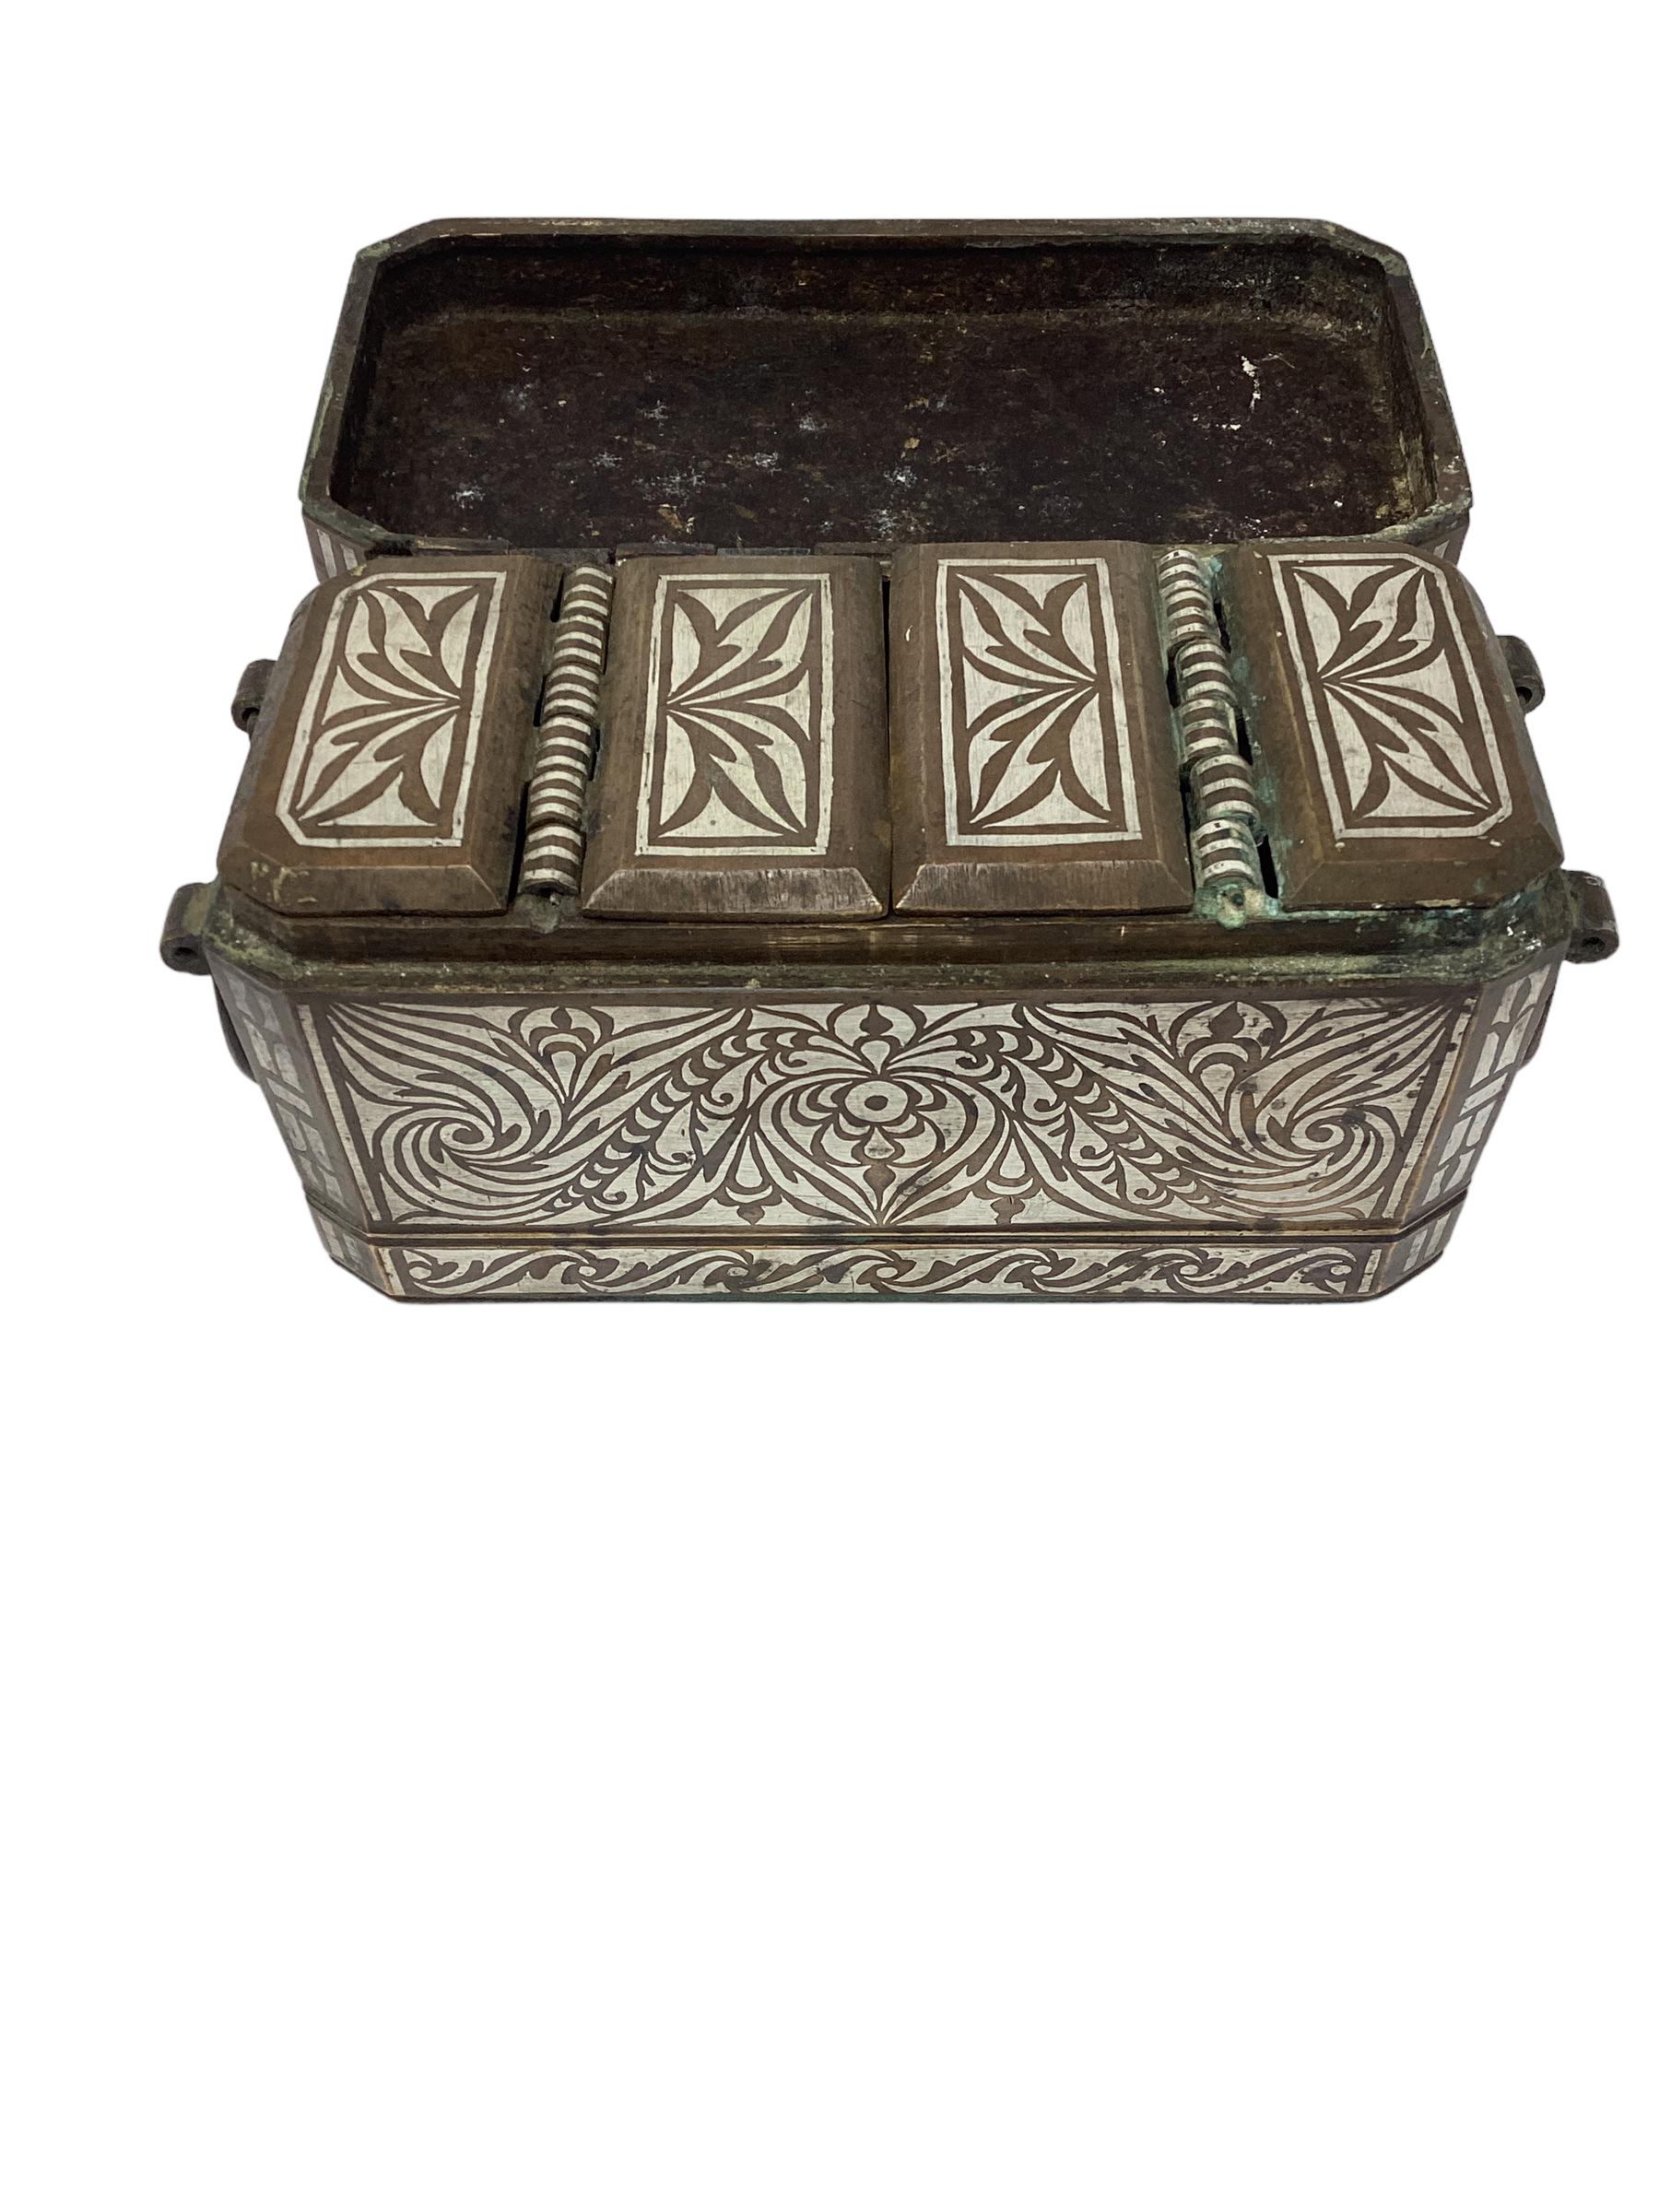 Philippine  Antique Bronze and Silver Inlaid Betel Nut Box For Sale